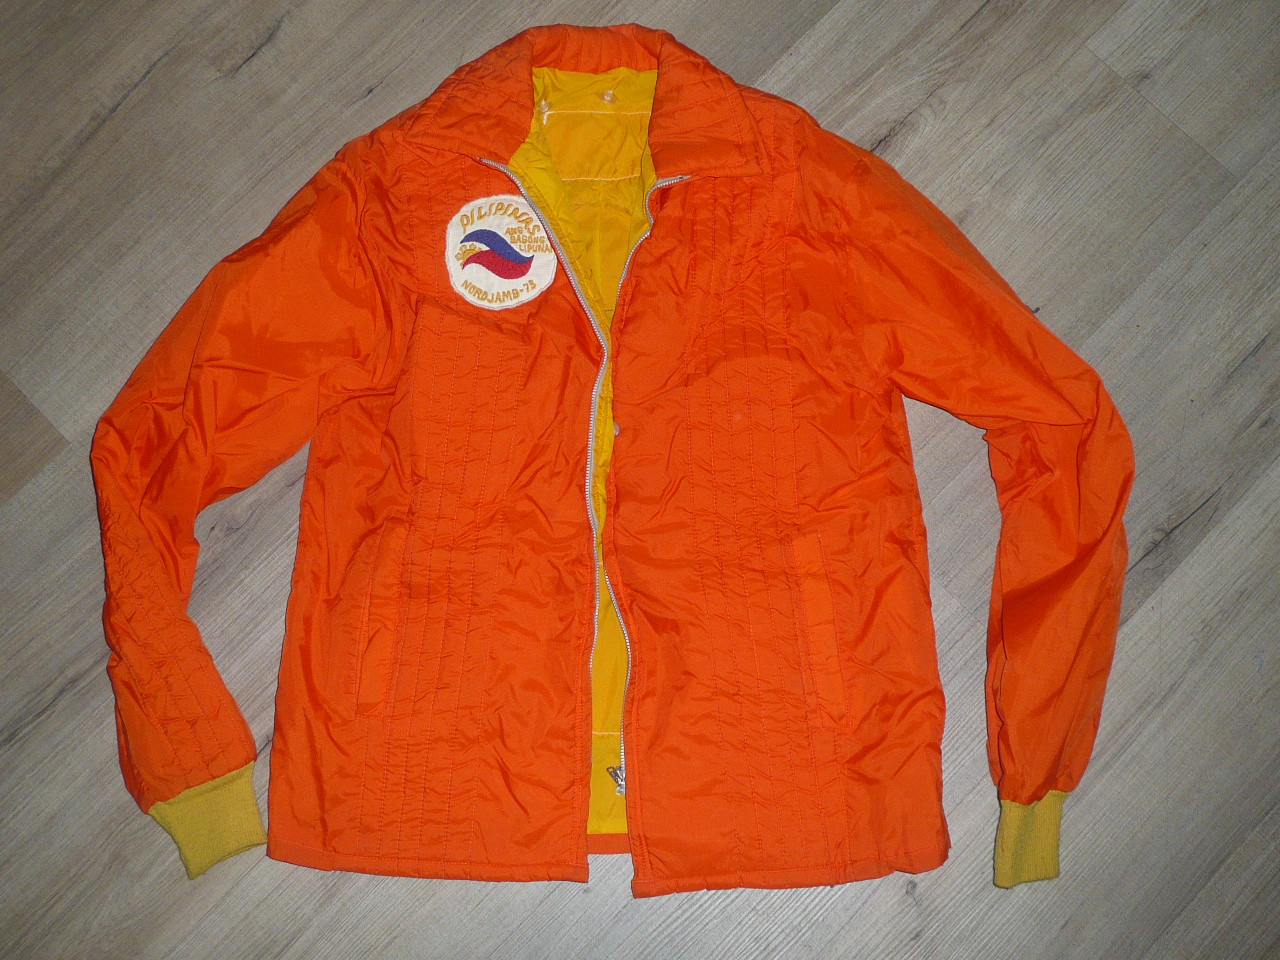 1975 World Jamboree Philippines Contingent Jacket with contingent patch, rare NordJamb75 Patch and other patches